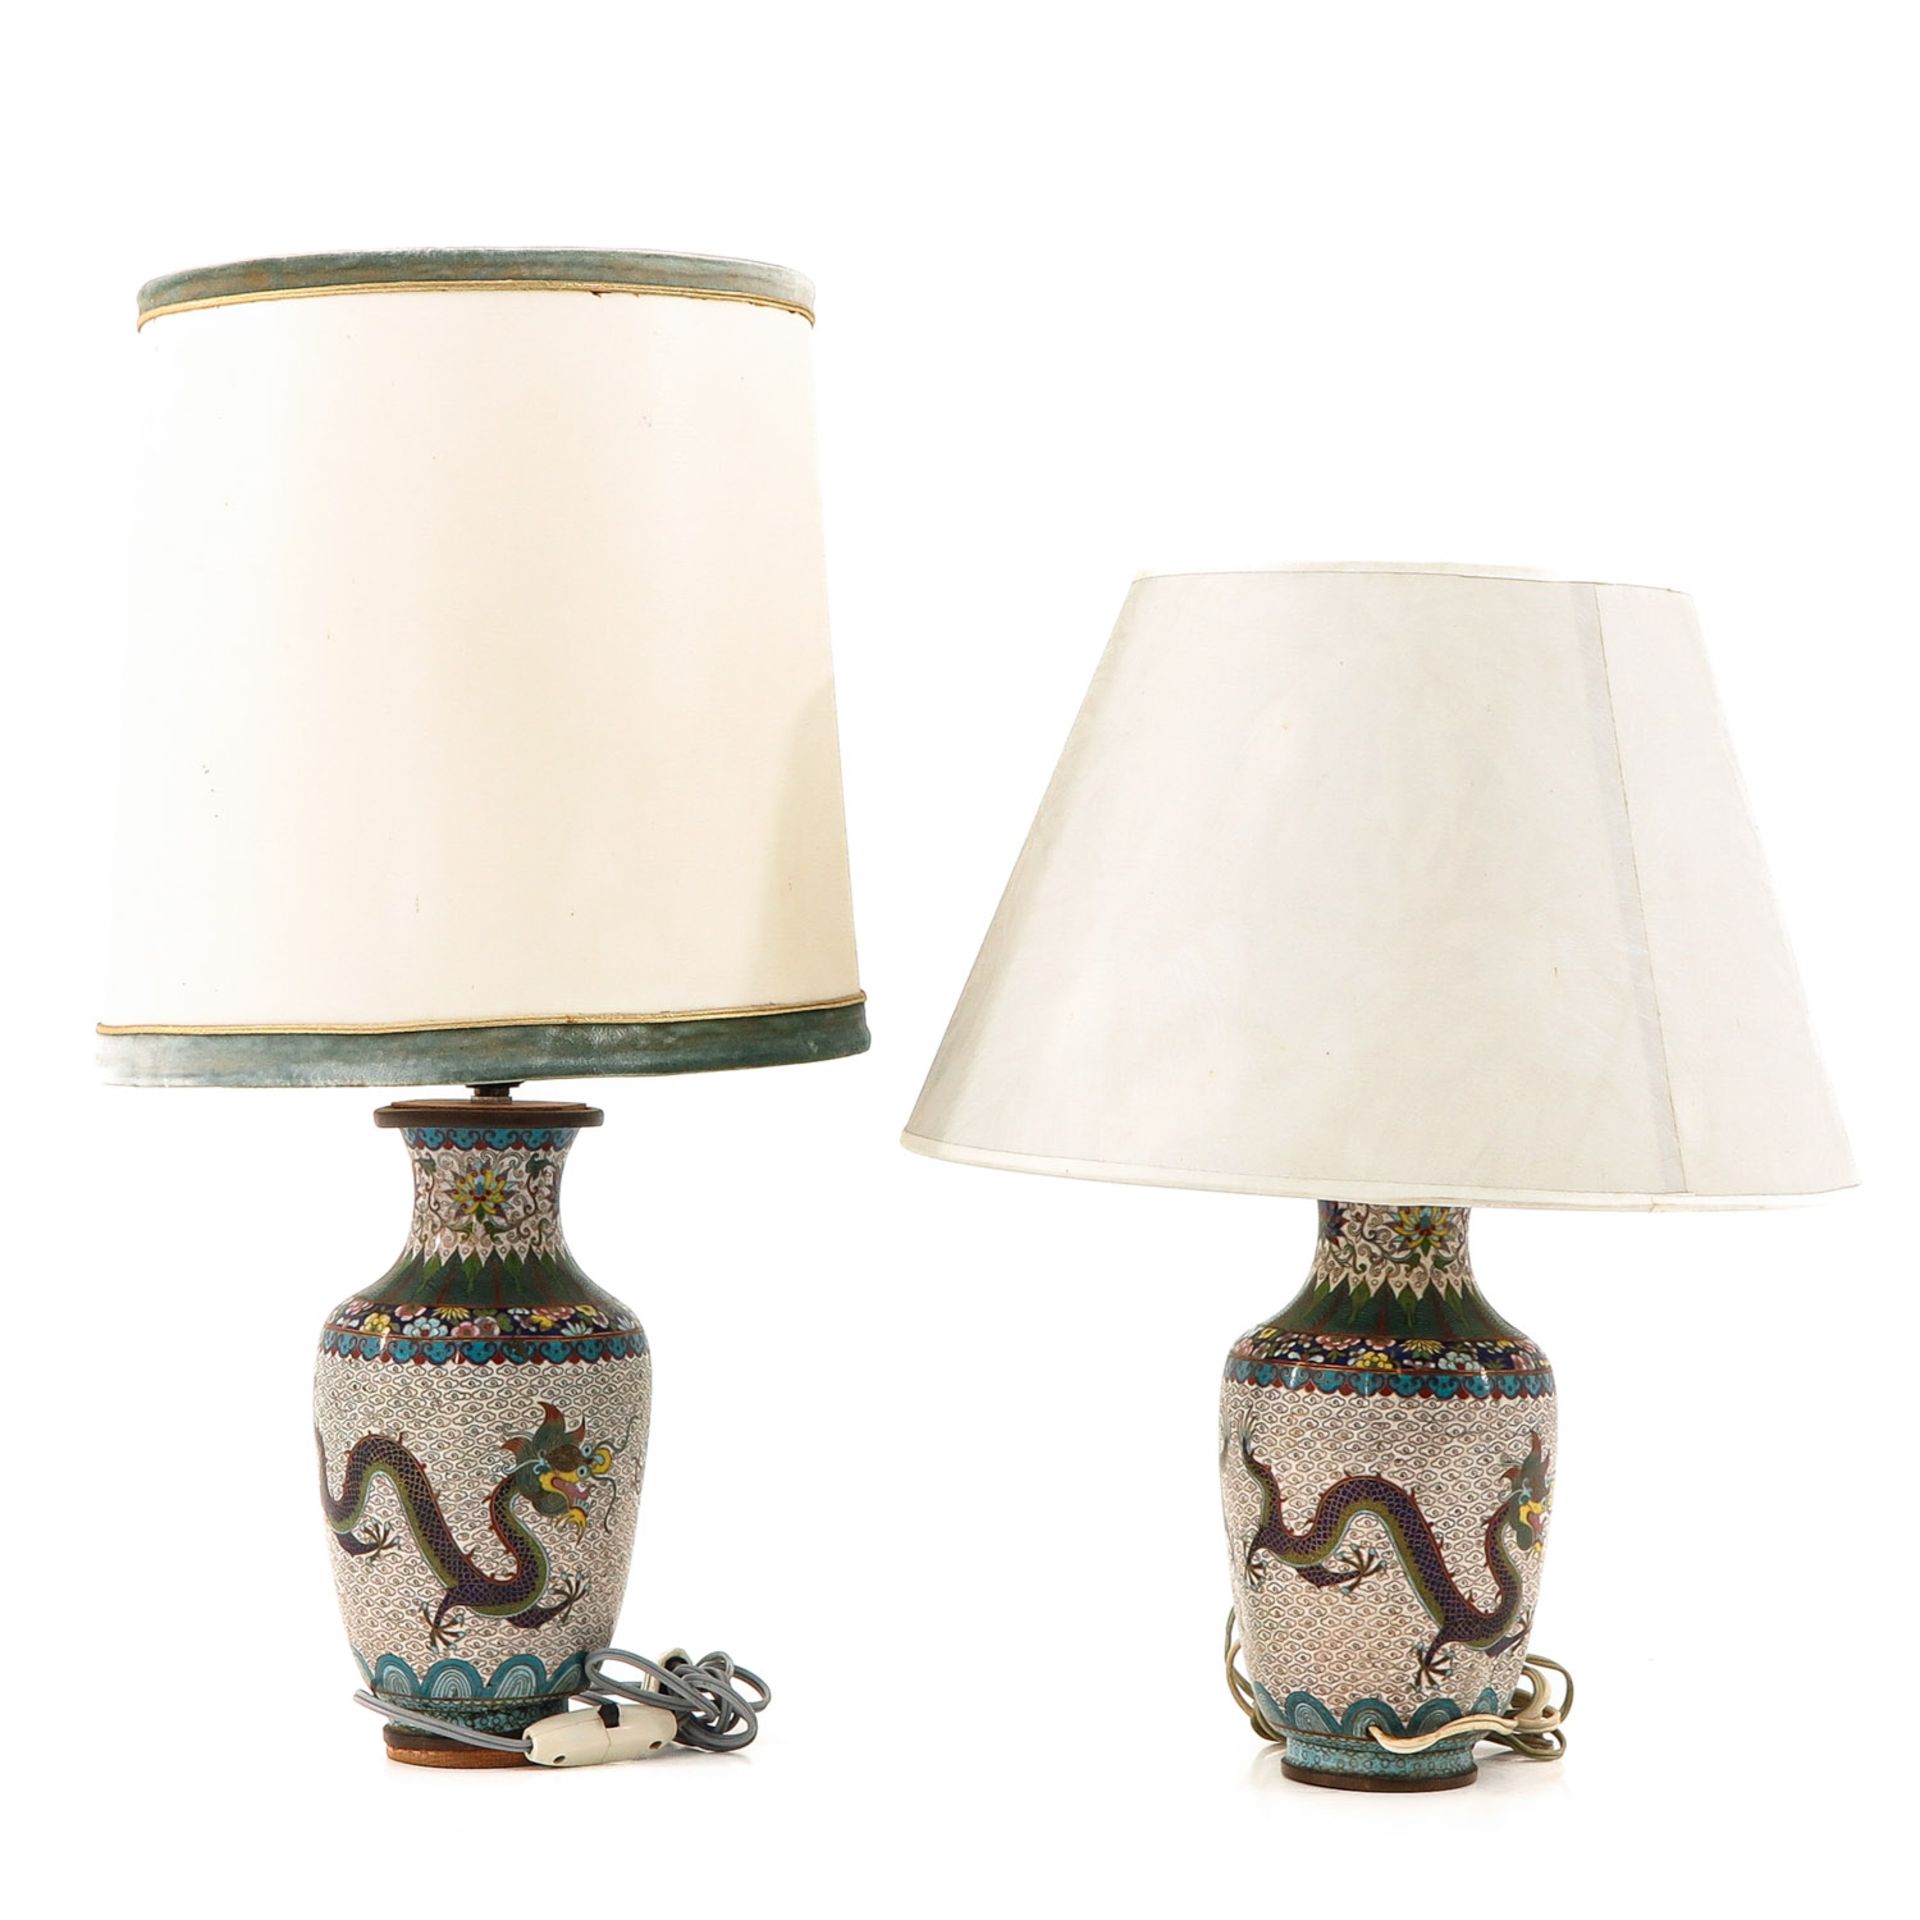 A Pair of Cloisonne Lamps - Image 4 of 9